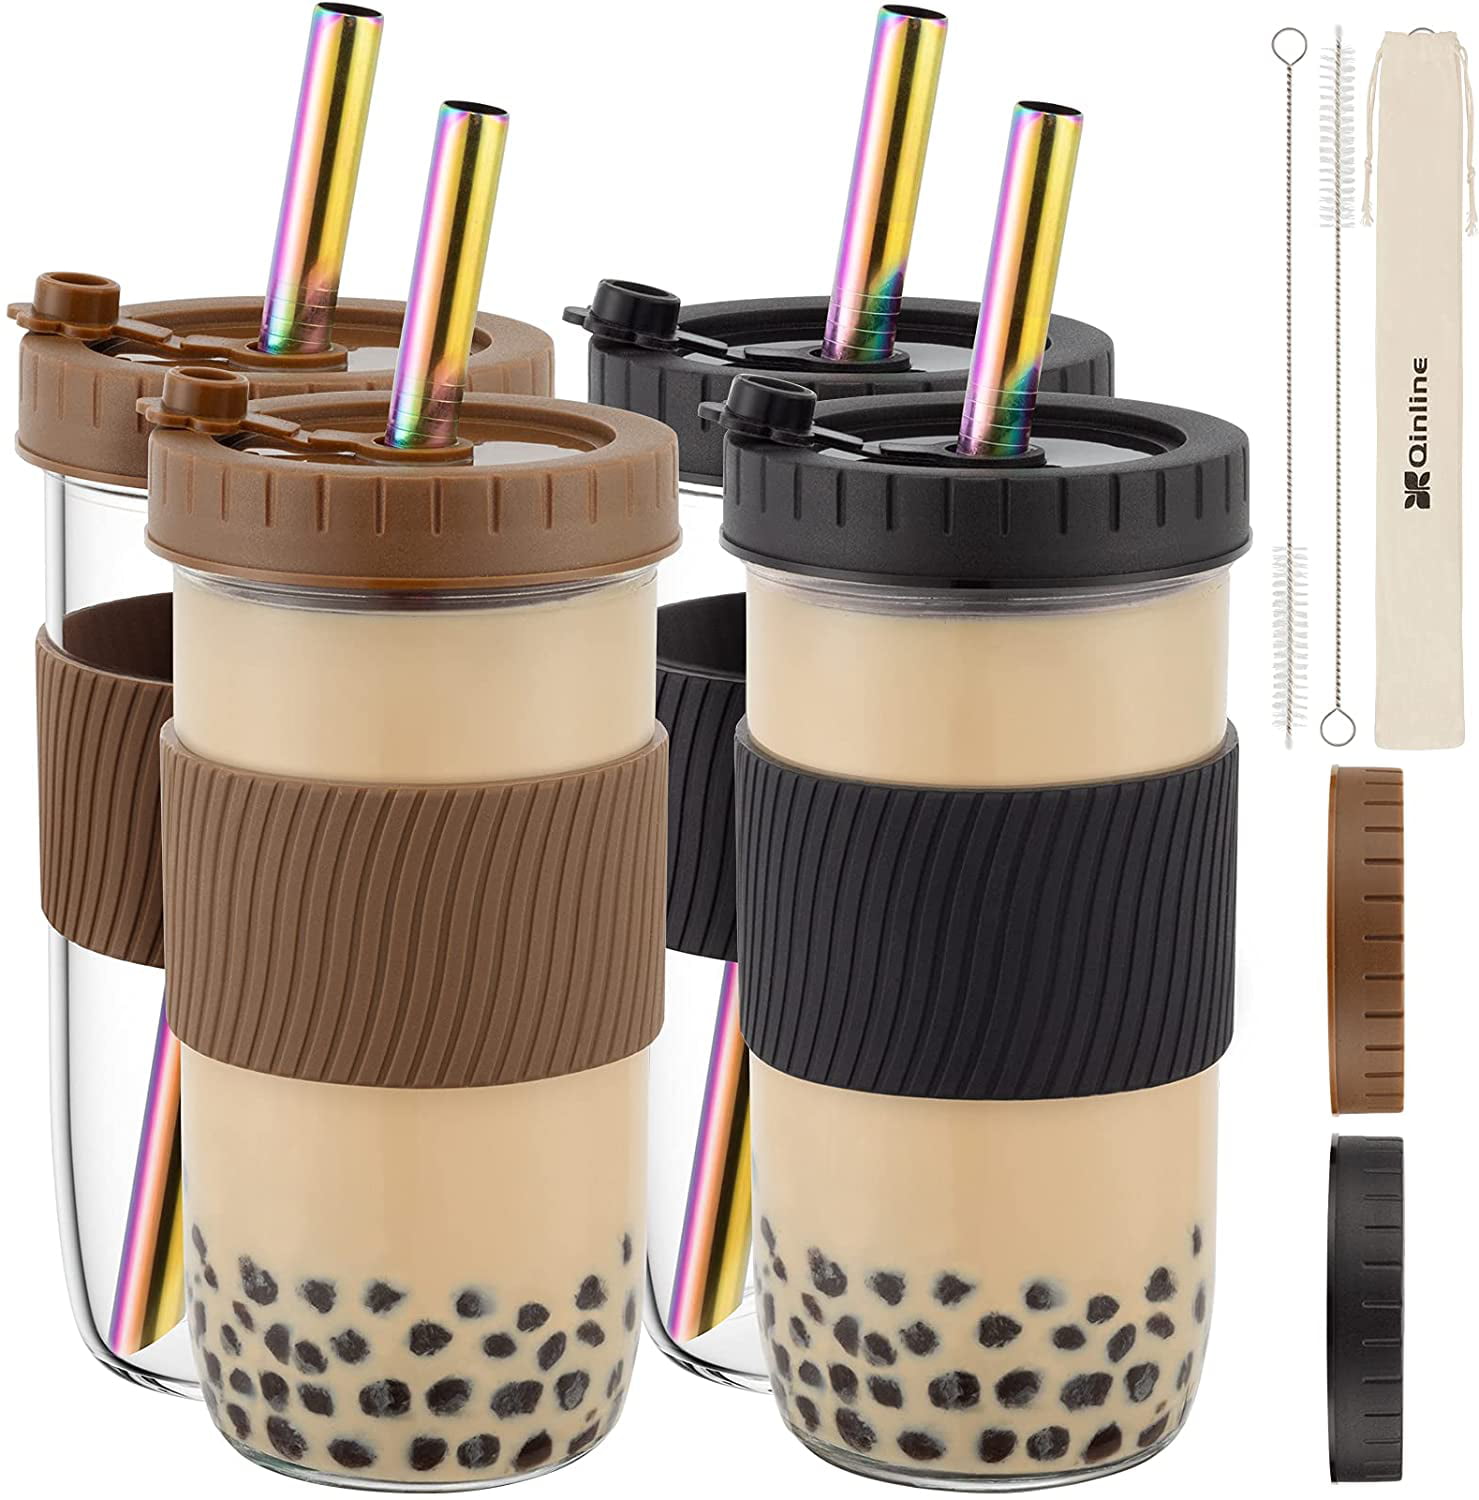 6 Pack Reusable Straws Silicone with Cleaning Brush 0.4 Extra Wide Straws for Bubble Tea/ Boba/ Smoothies Straight and Bendy Separate